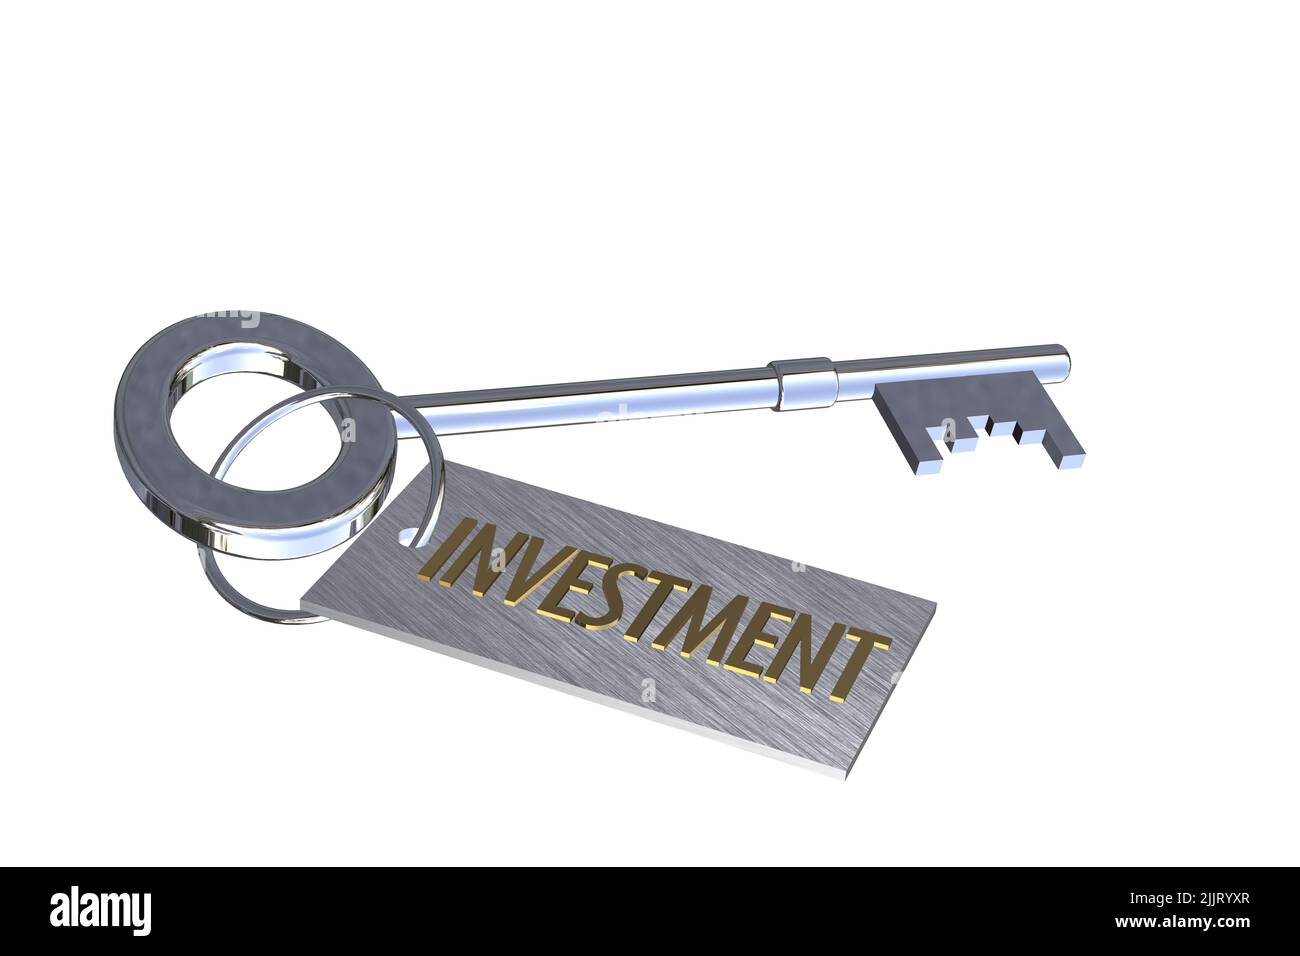 key to investment concept silver 3D key with key ring tag with text word words investment concept cut out isolated on white background Stock Photo